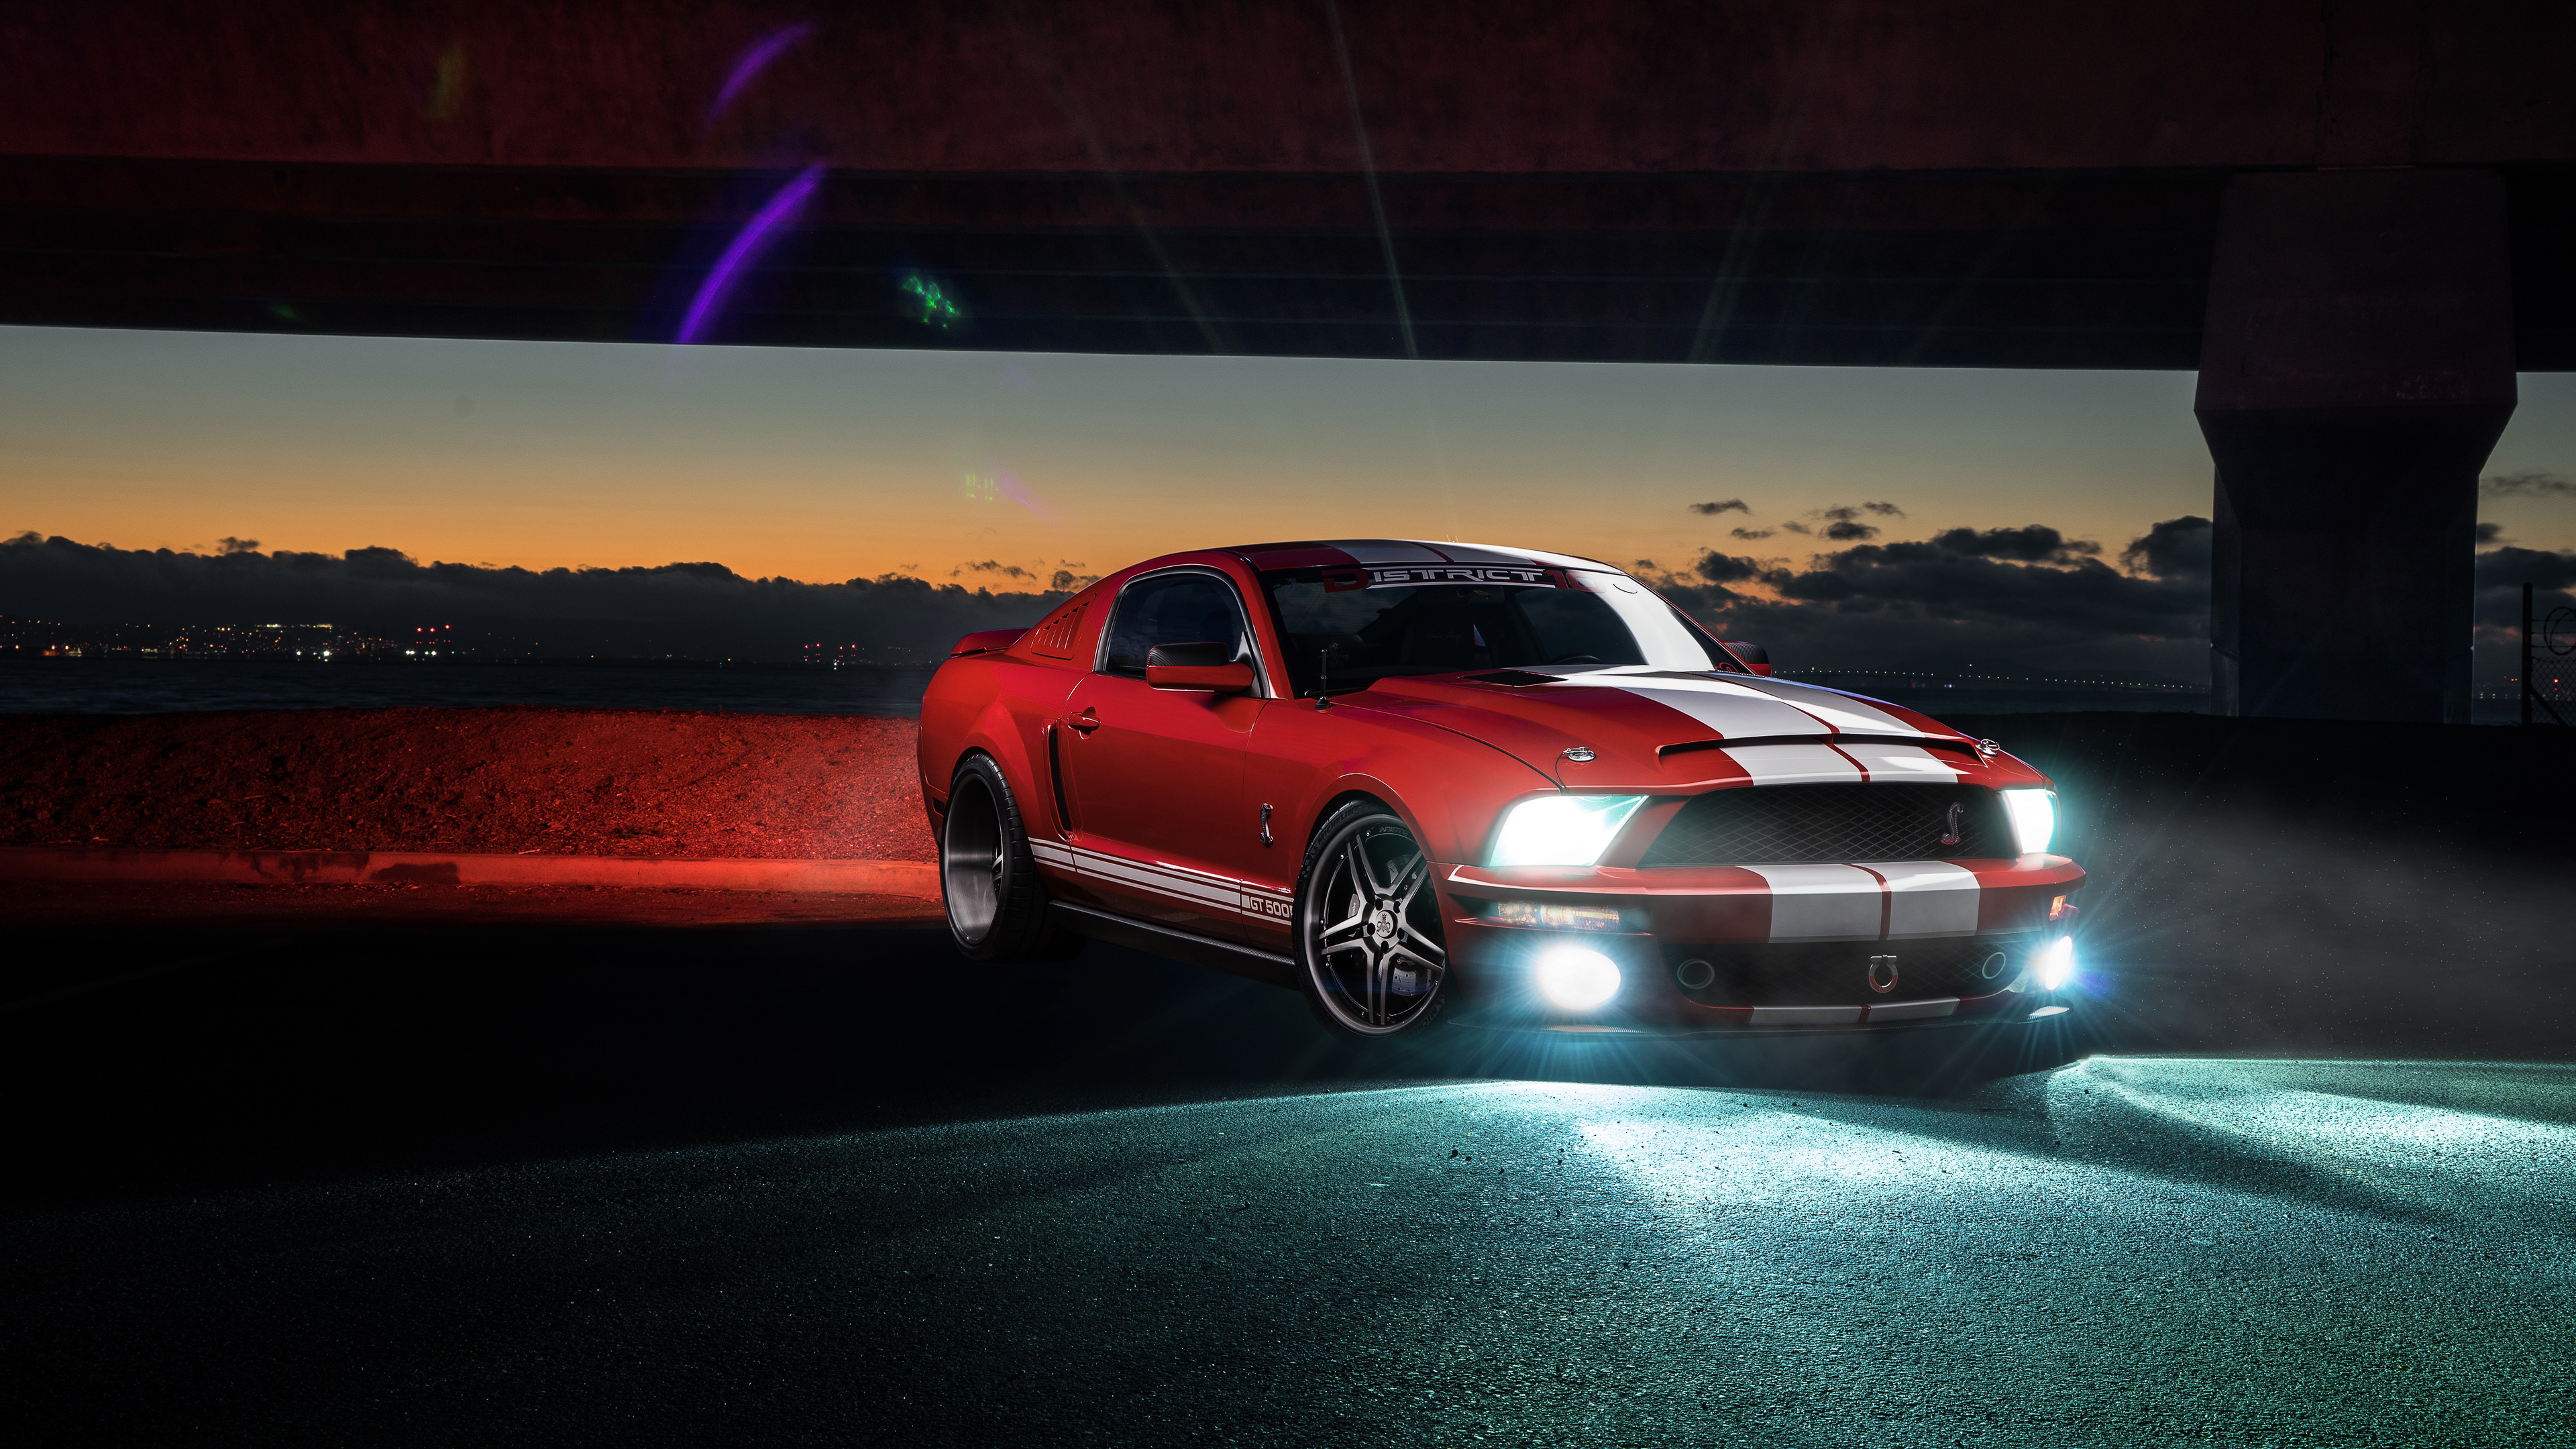 Ford Mustang Shelby GT500 Wallpaper - HD Car Wallpapers #6526